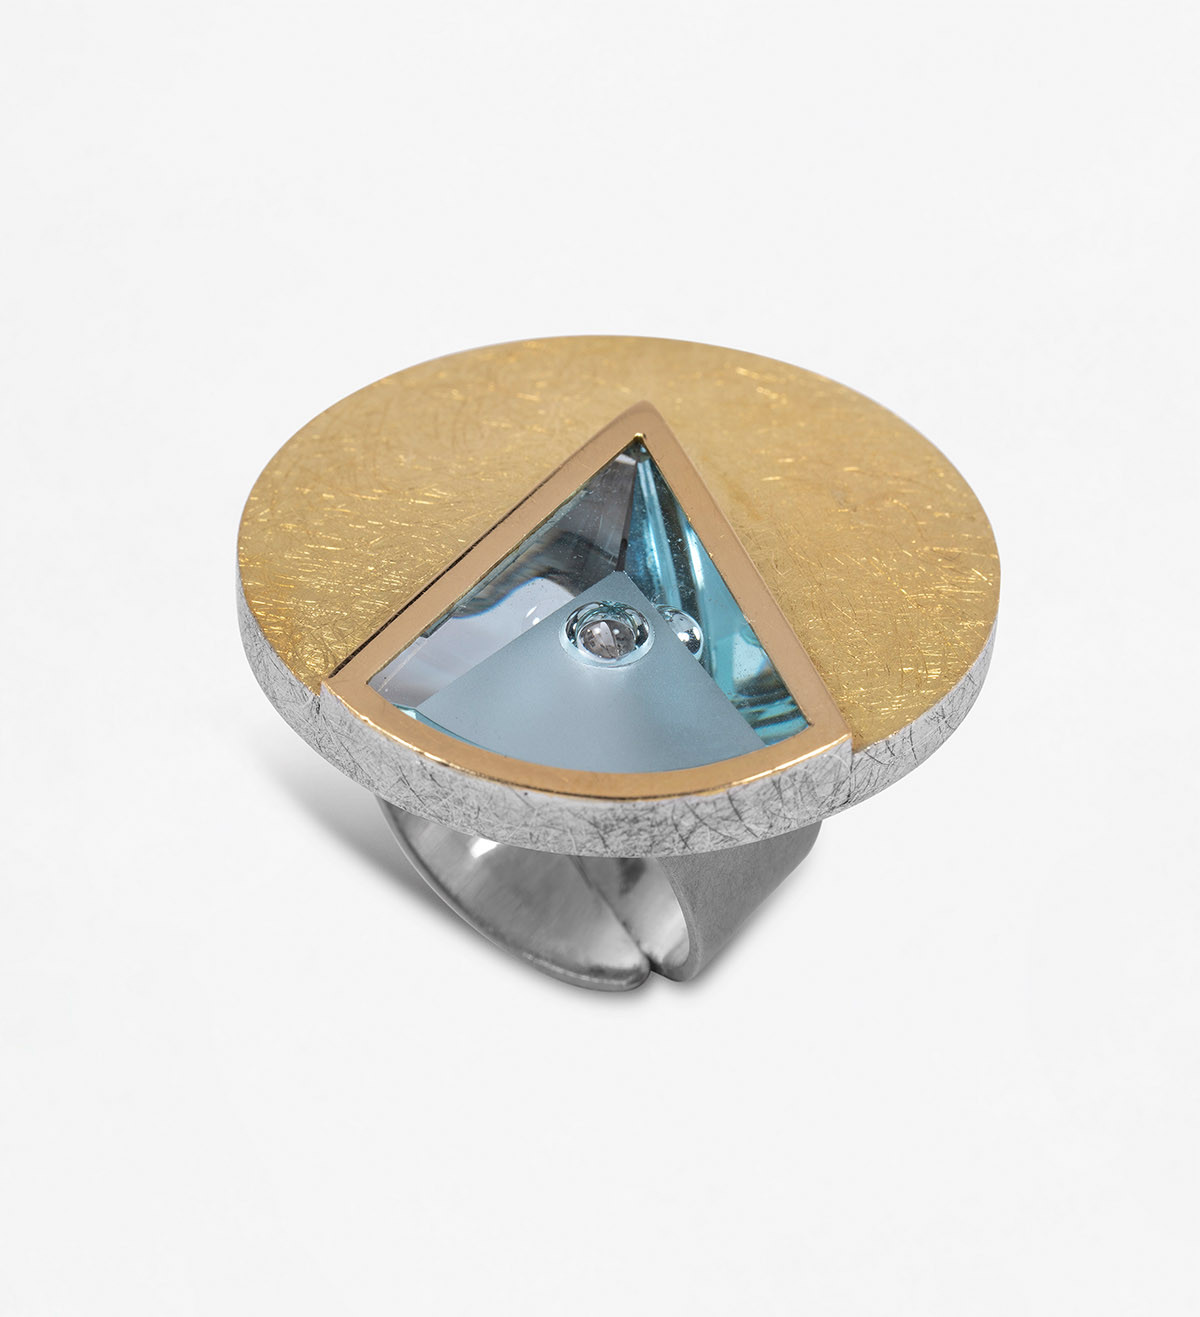 18k gold and silver ring with Munsteiner aquamarine 8,84ct